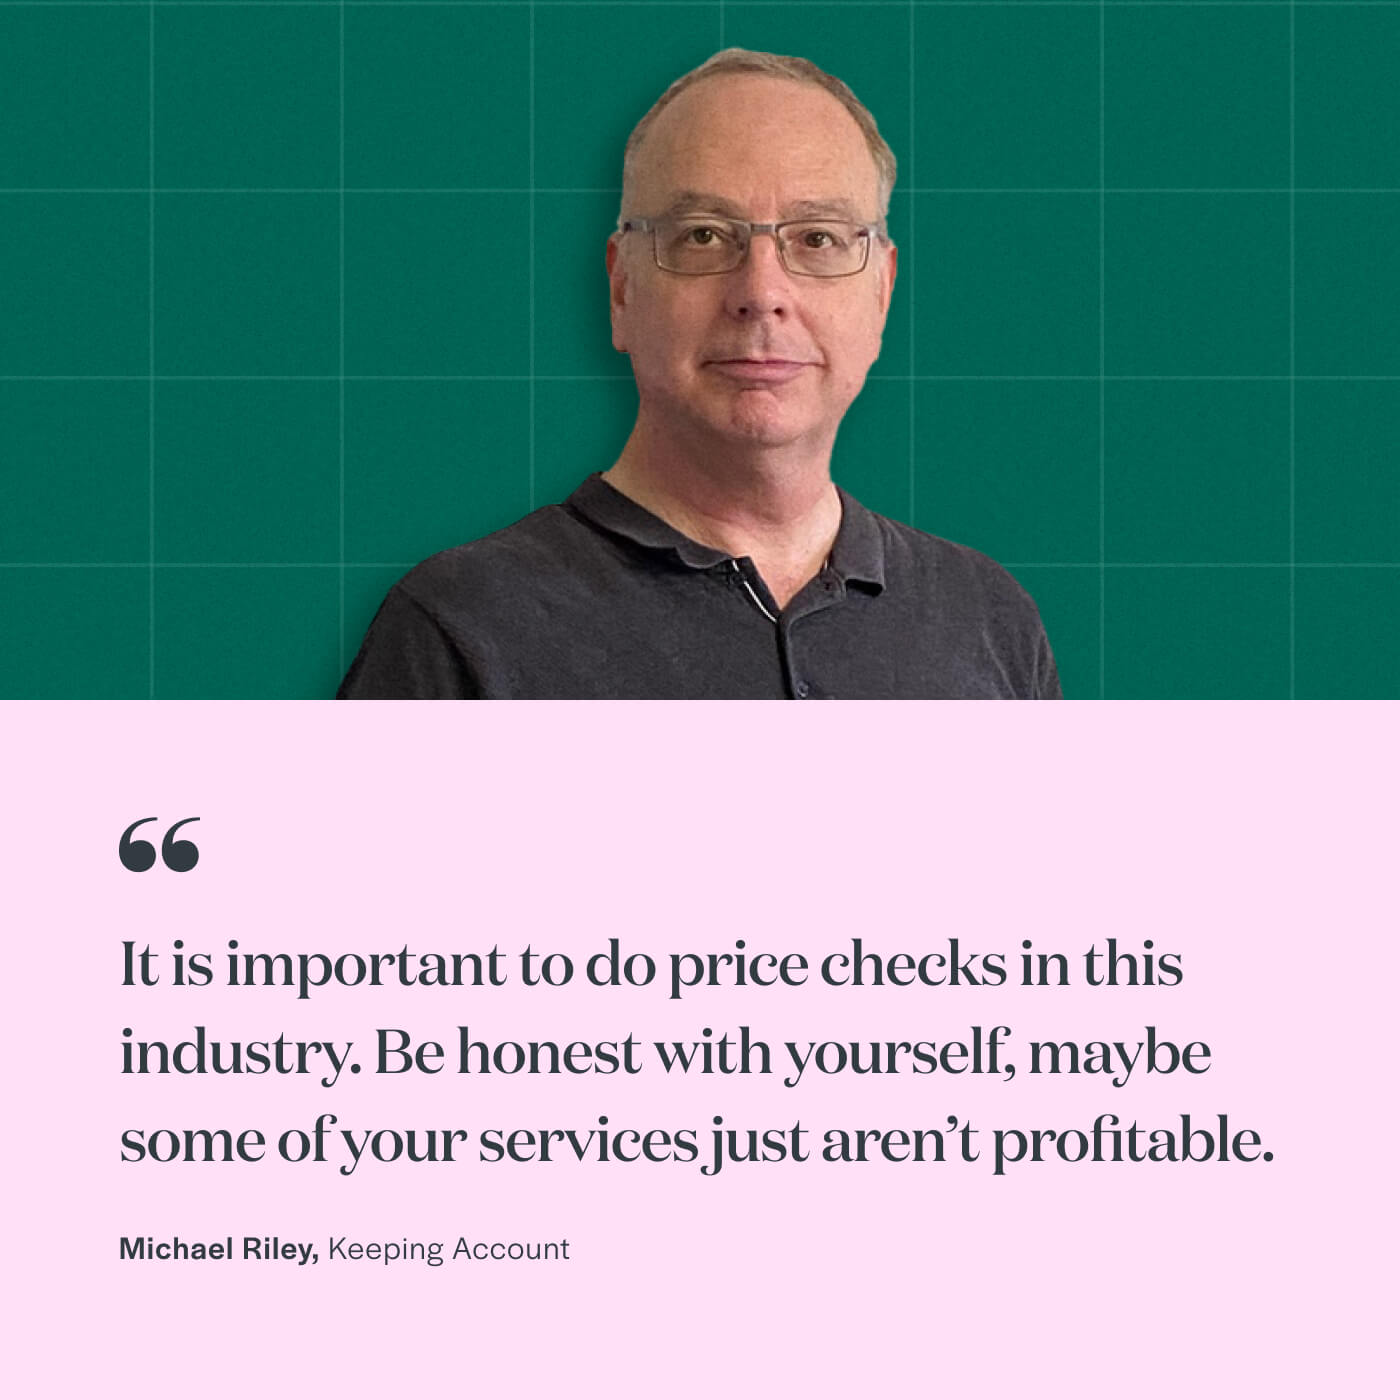 “It’s important to do price checks in this industry. Be honest with yourself, maybe some of your services are just not profitable.” Michael Riley, Keeping Account